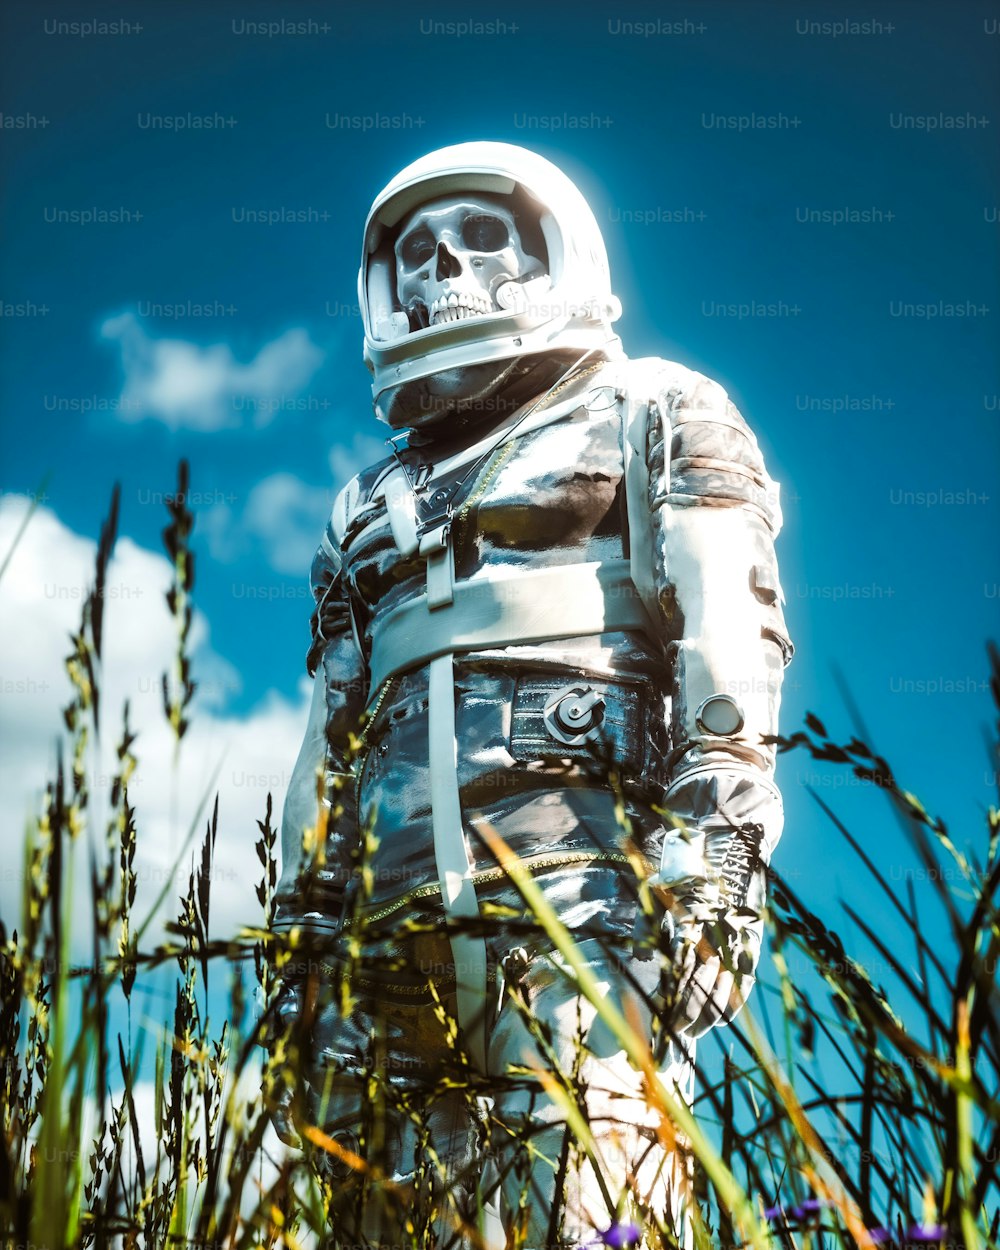 a man in a space suit standing in tall grass